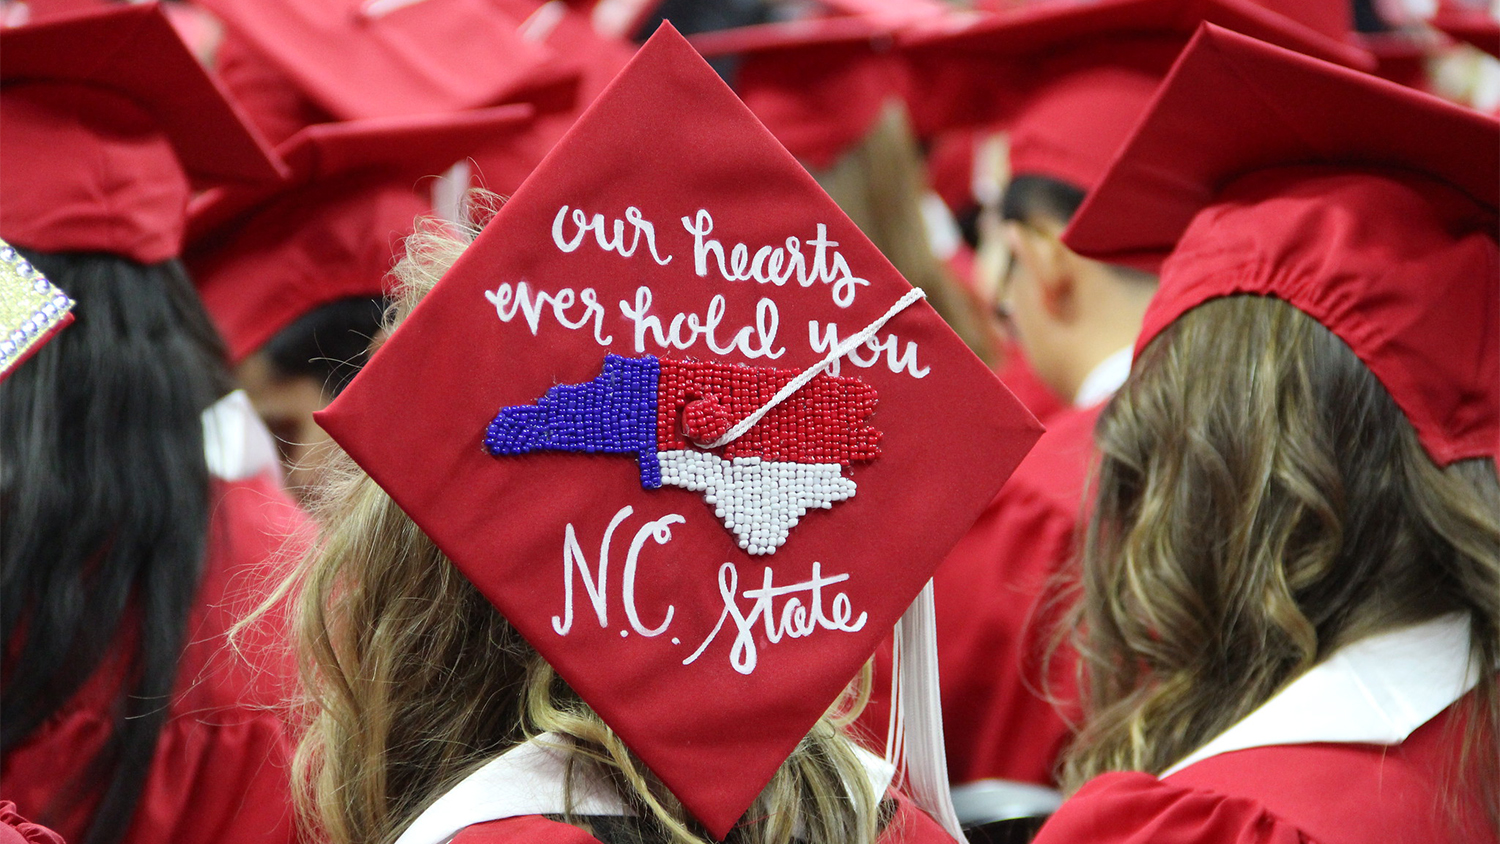 The top of a graduate's hat that reads "Our hearts ever hold you, NC State"